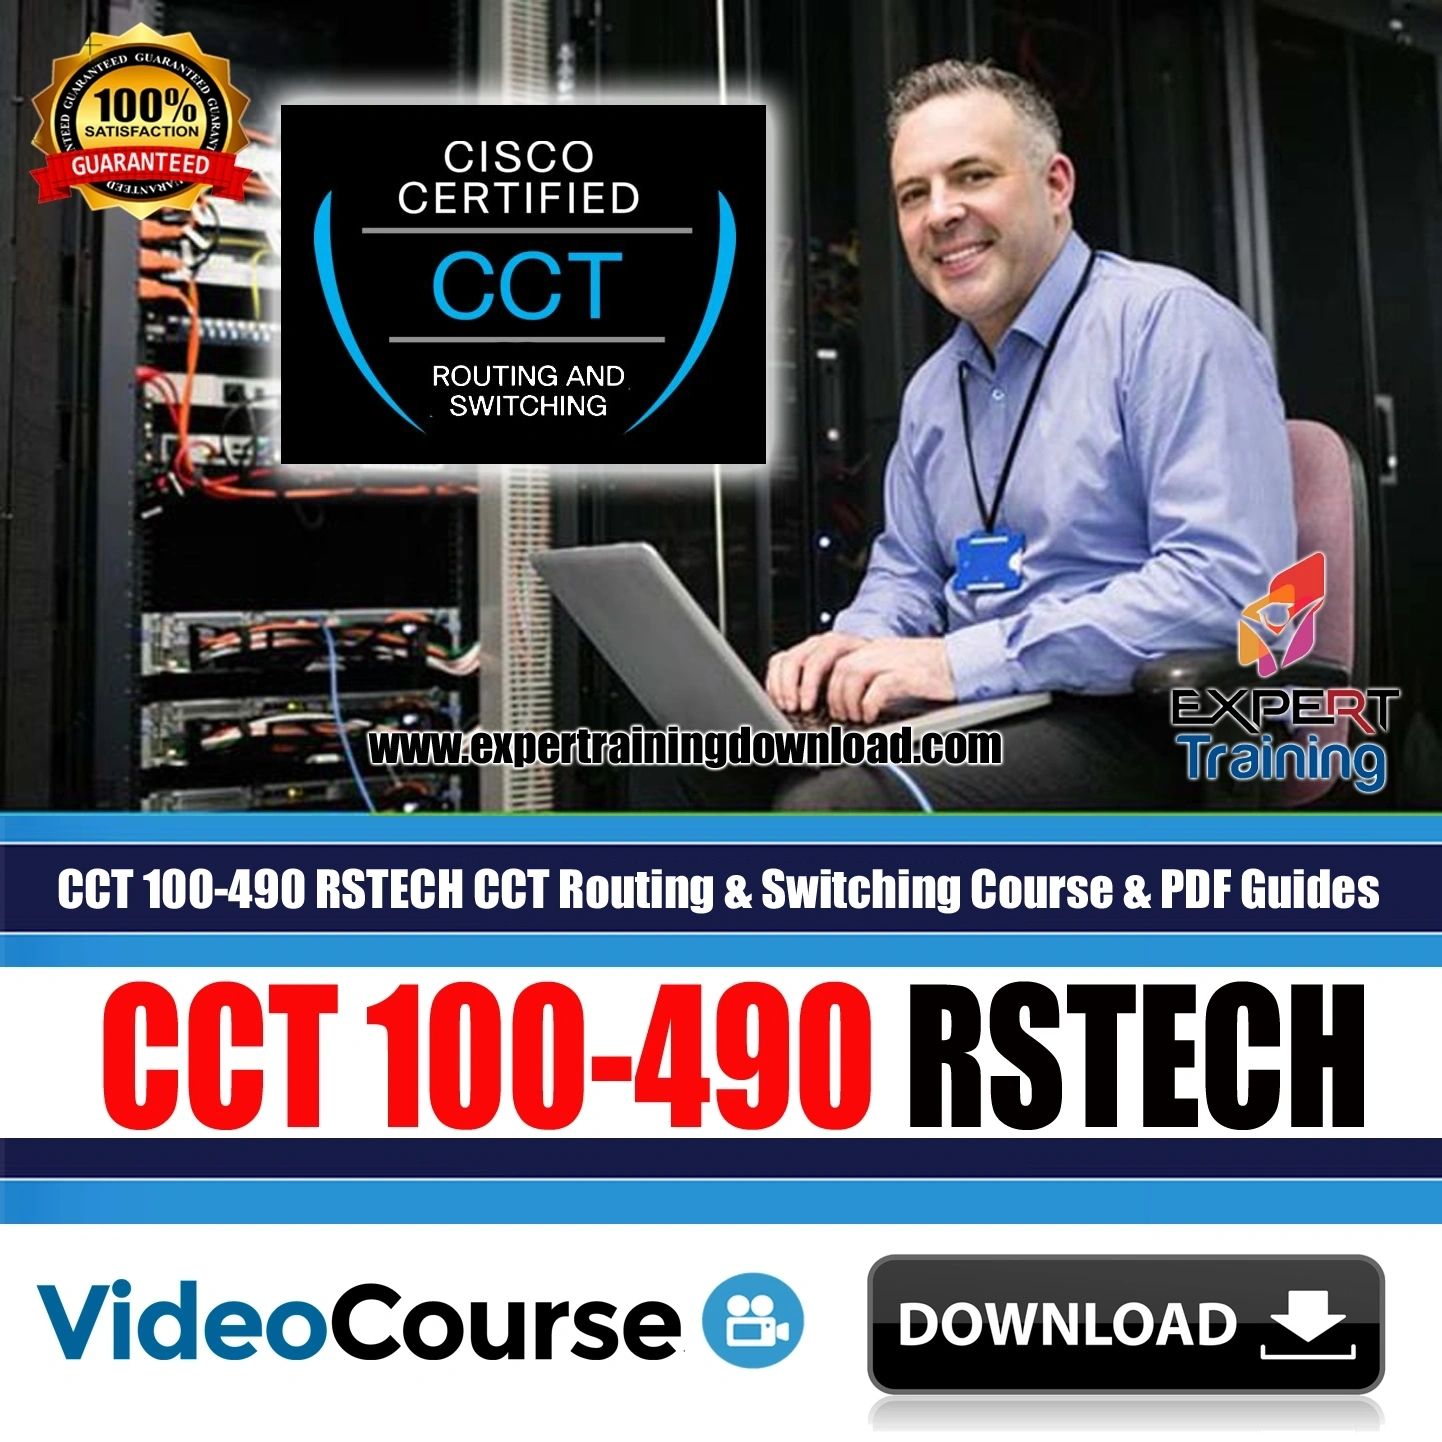 CCT 100?490 RSTECH CCT Routing & Switching Course & PDF Guides